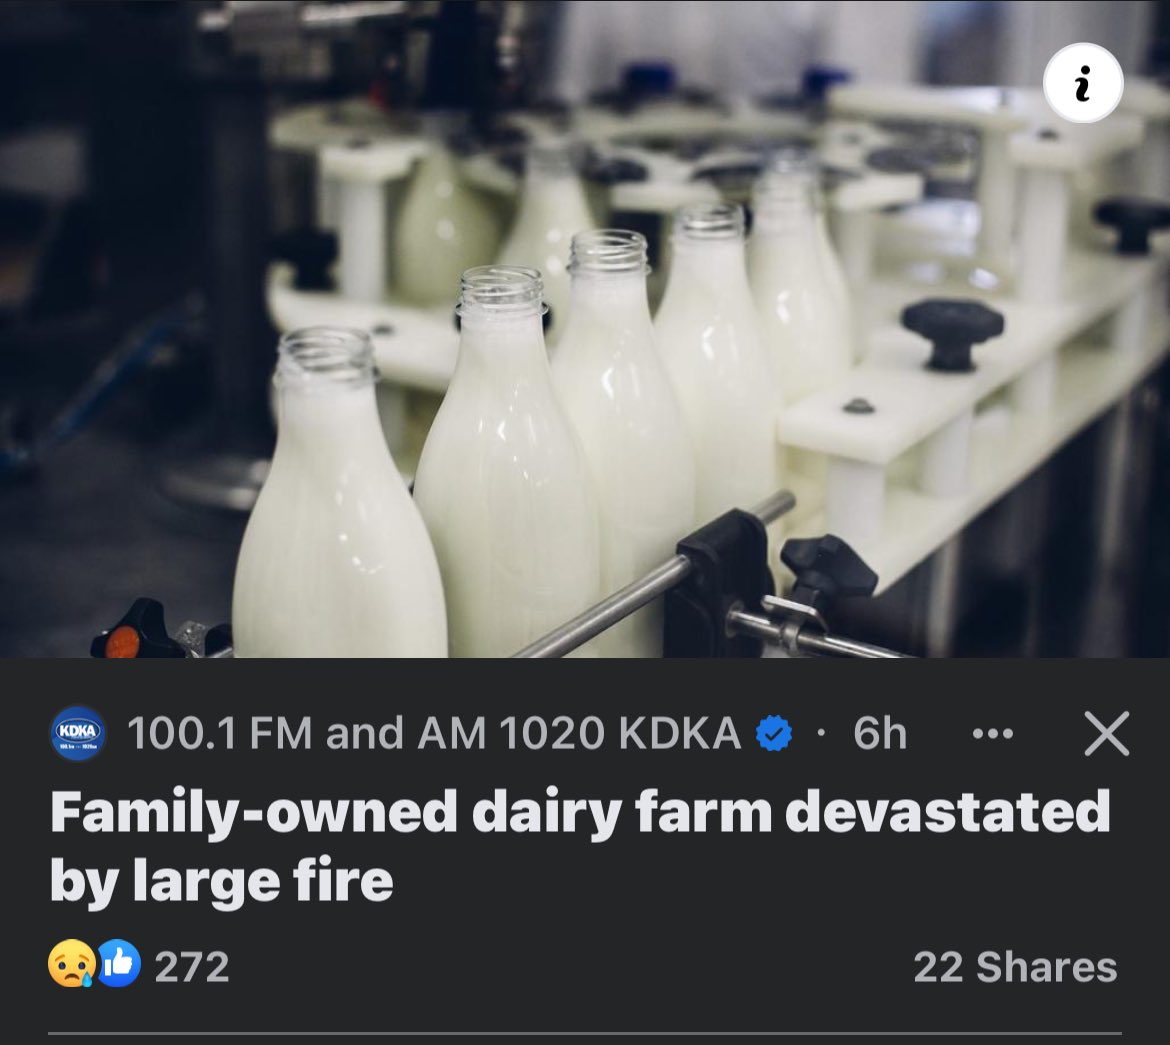 Yet another family Farm burned down by a fire. They sure are an awful lot of these. Any thoughts on this? Please let me know below. #Health #Health#rfkjr #Milk, #RawMilk #Organic #FamilyFarm #LocalFarm